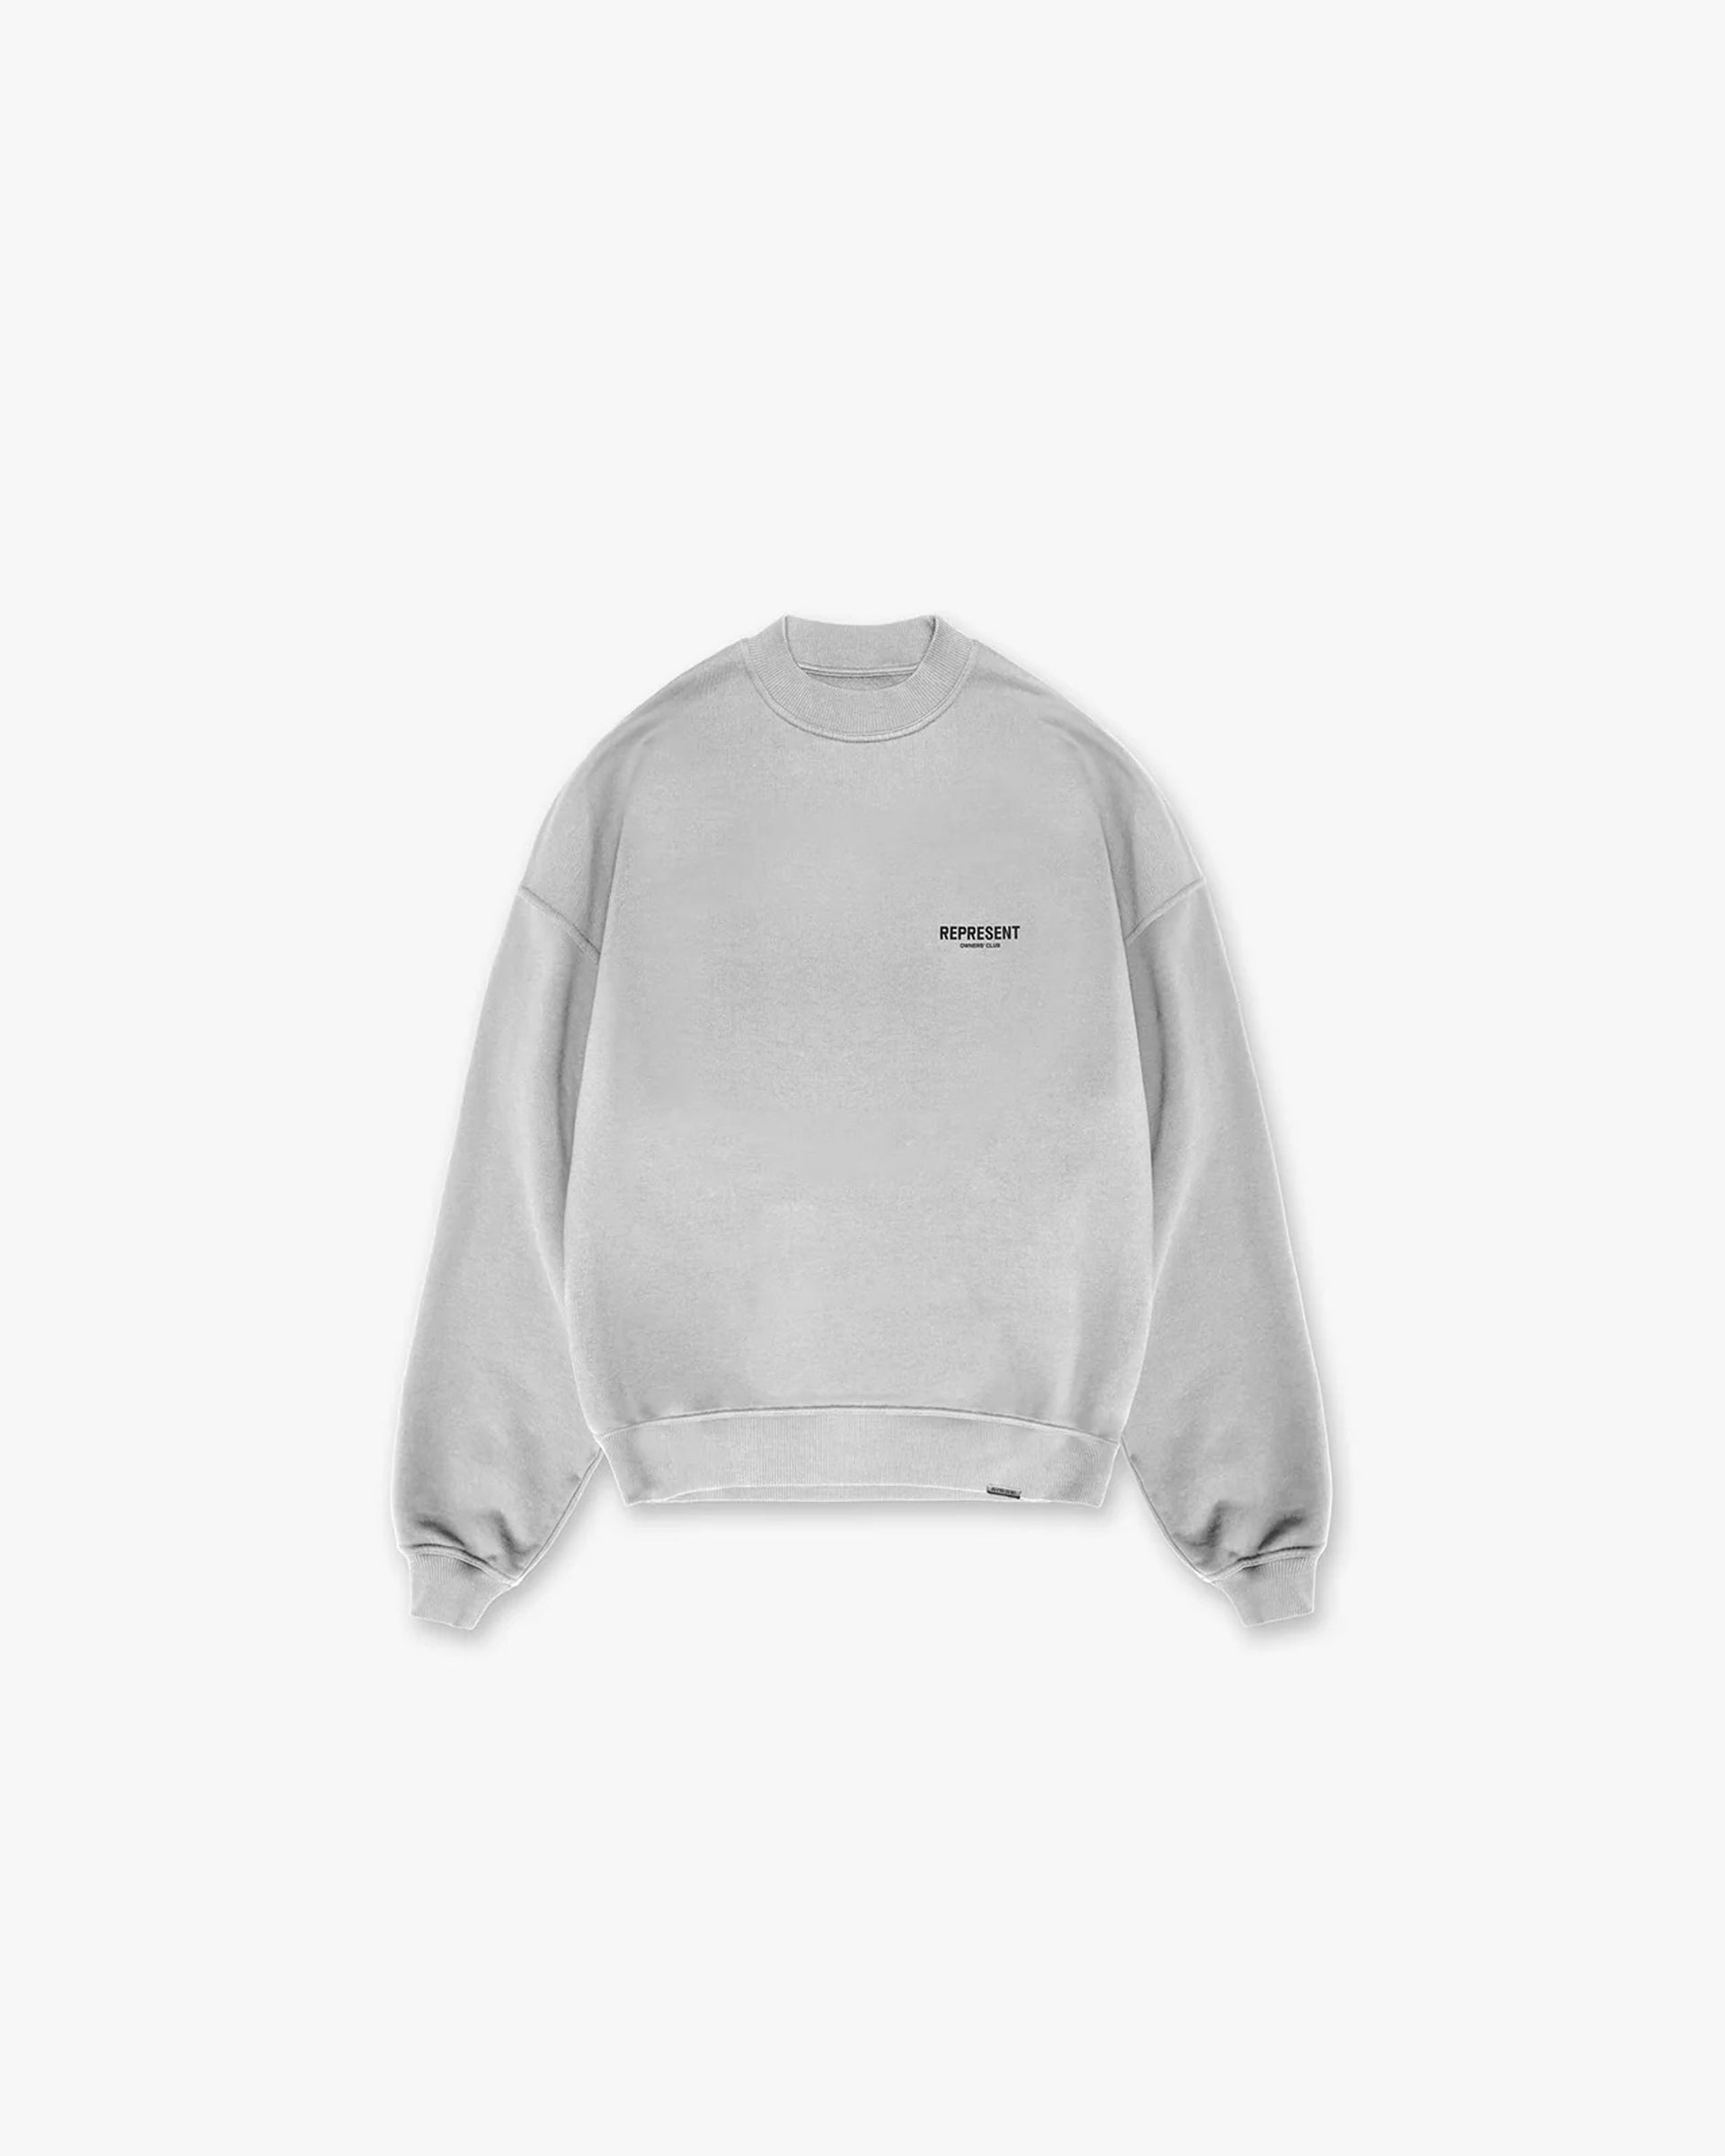 Represent Owners Club Sweater | Ash Grey Sweaters Owners Club | Represent Clo